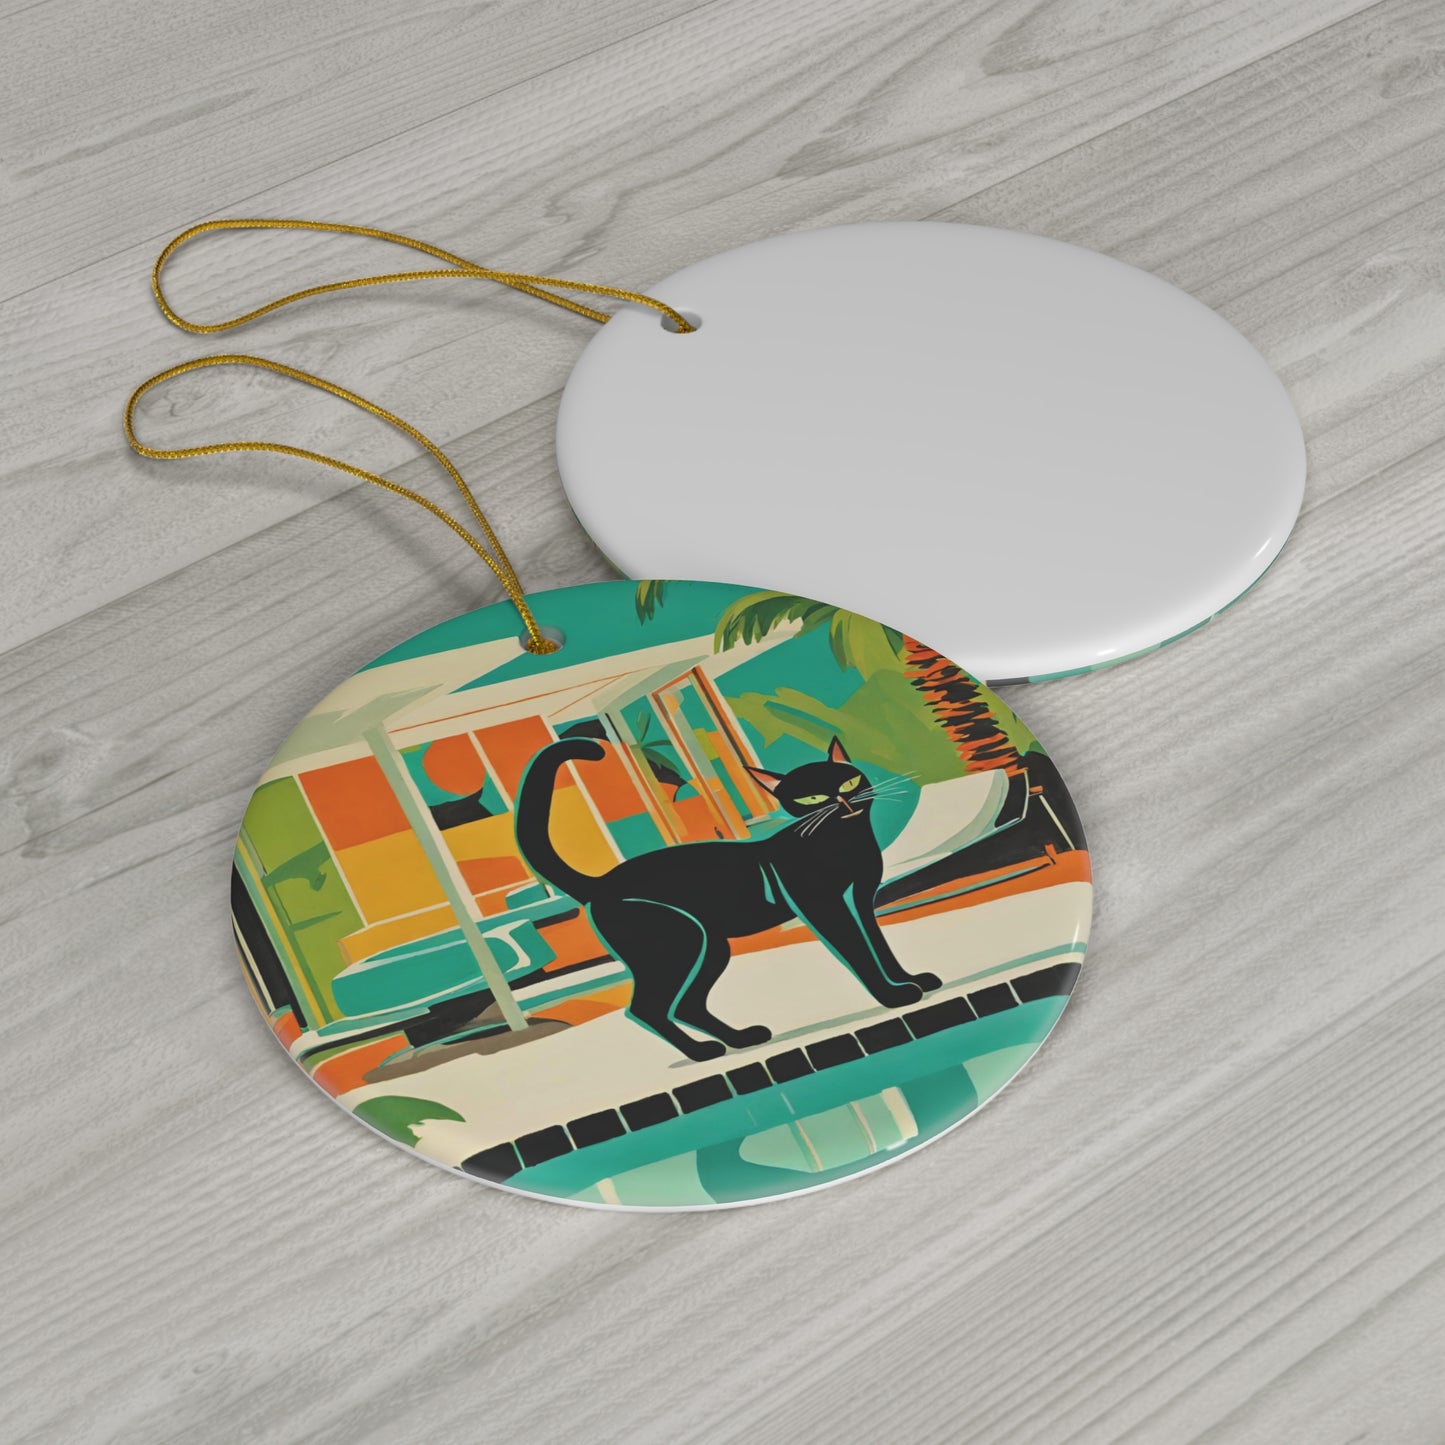 Palm Springs Desert Poolside Panther Cat Midcentury Modern Architecture Ceramic Ornament